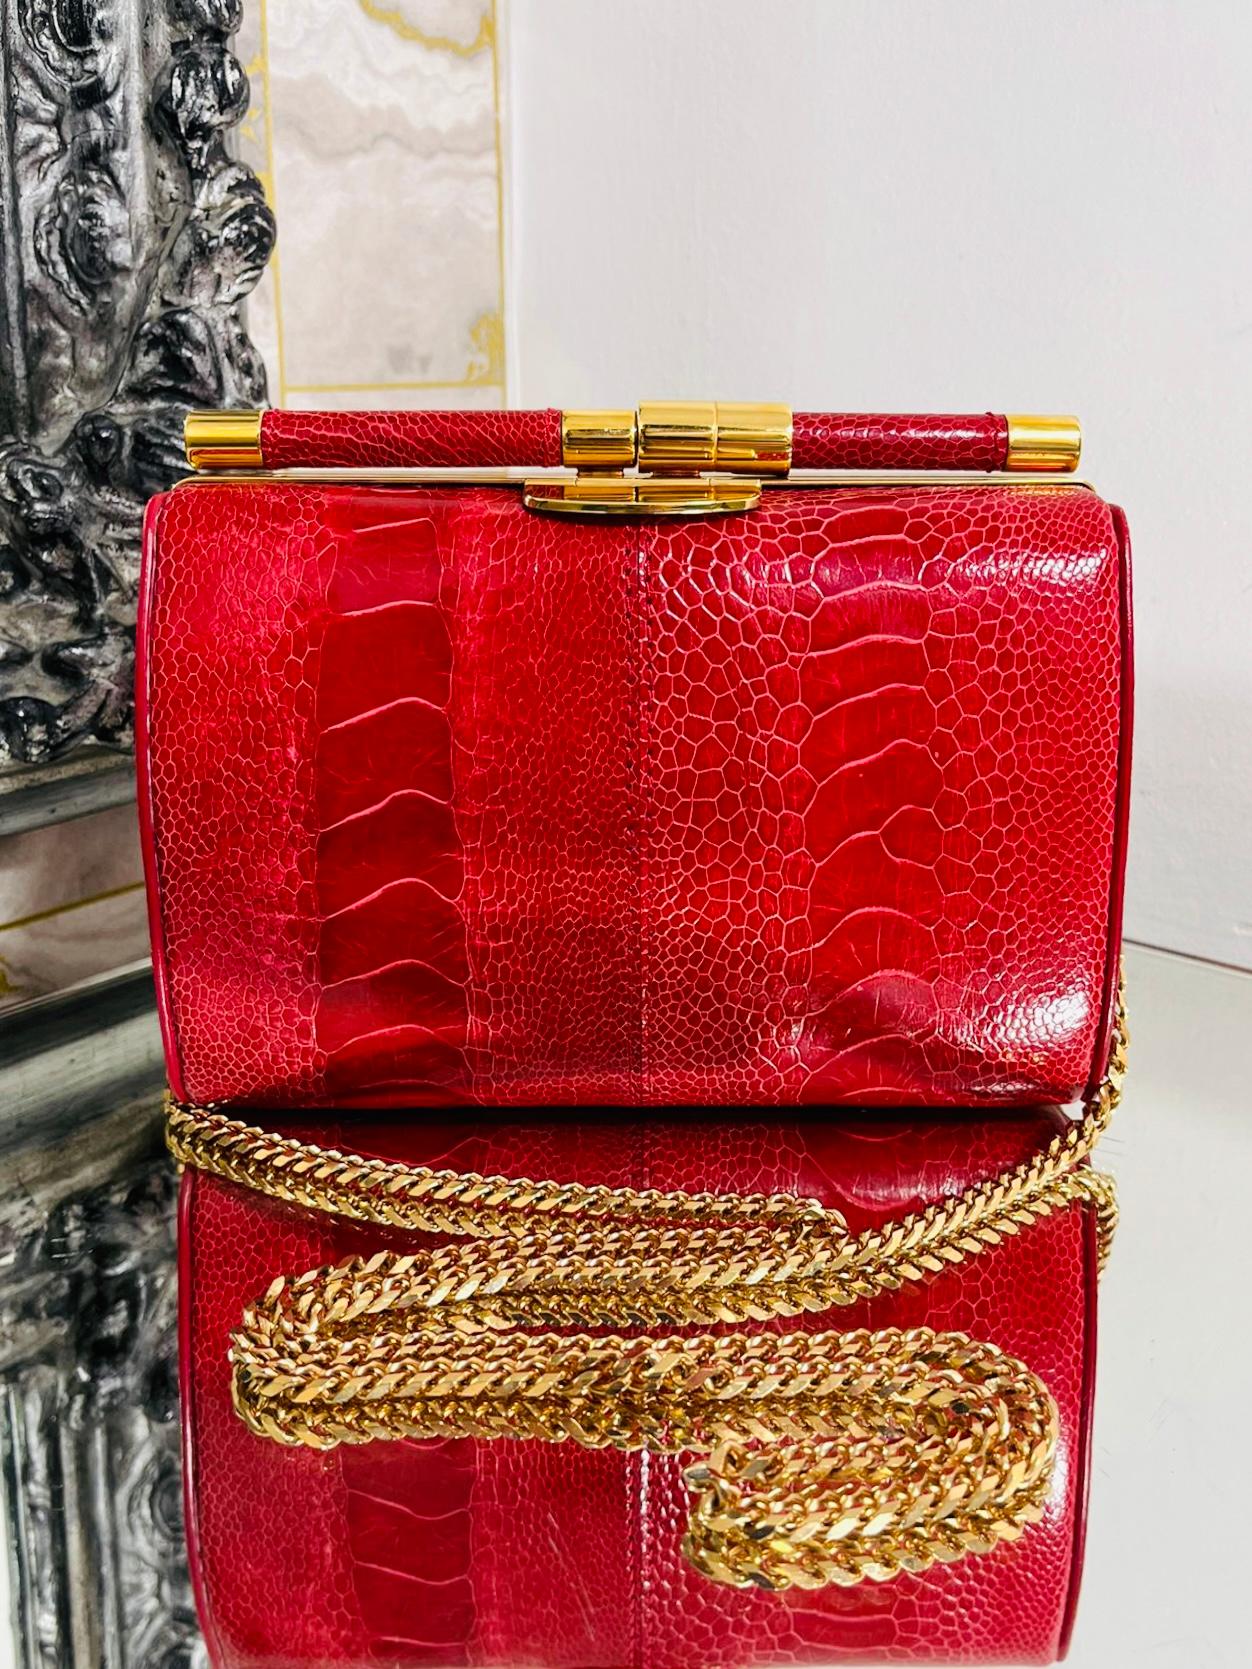 Tyler Ellis Ostrich Skin Clutch Bag With Chain Strap

In red exotic skin and gold hardware, Anjuli evening bag.

Structed oval bag with removable crossbody chain strap.

Rrp £3,500.

Size - Height 14cm, Width 18cm, Depth 7cm

Condition - Very Good